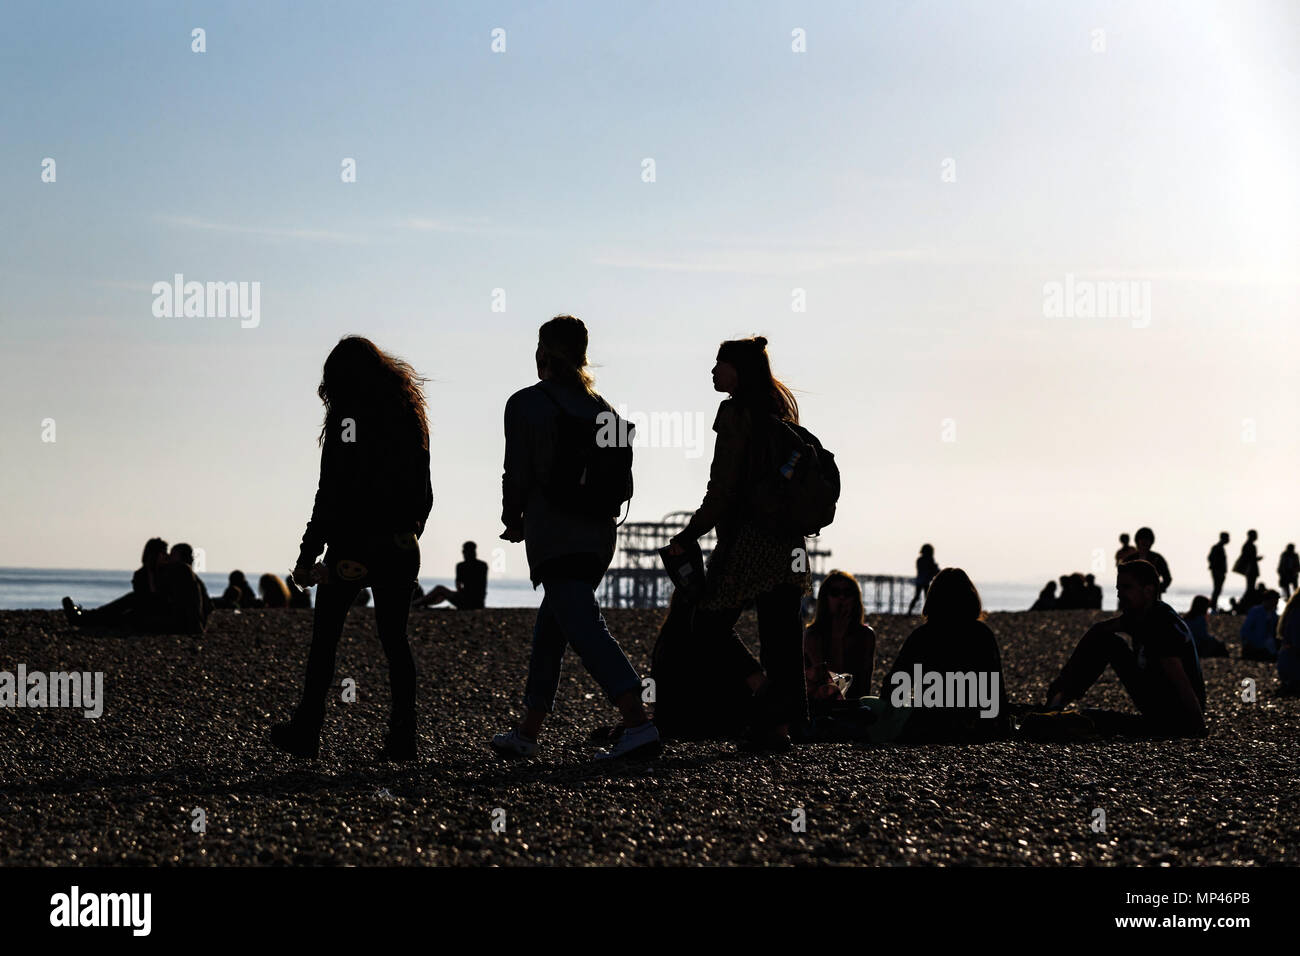 Silhouette figures on Brighton seafront on a warm evening. Brighton, East Sussex, UK. Stock Photo